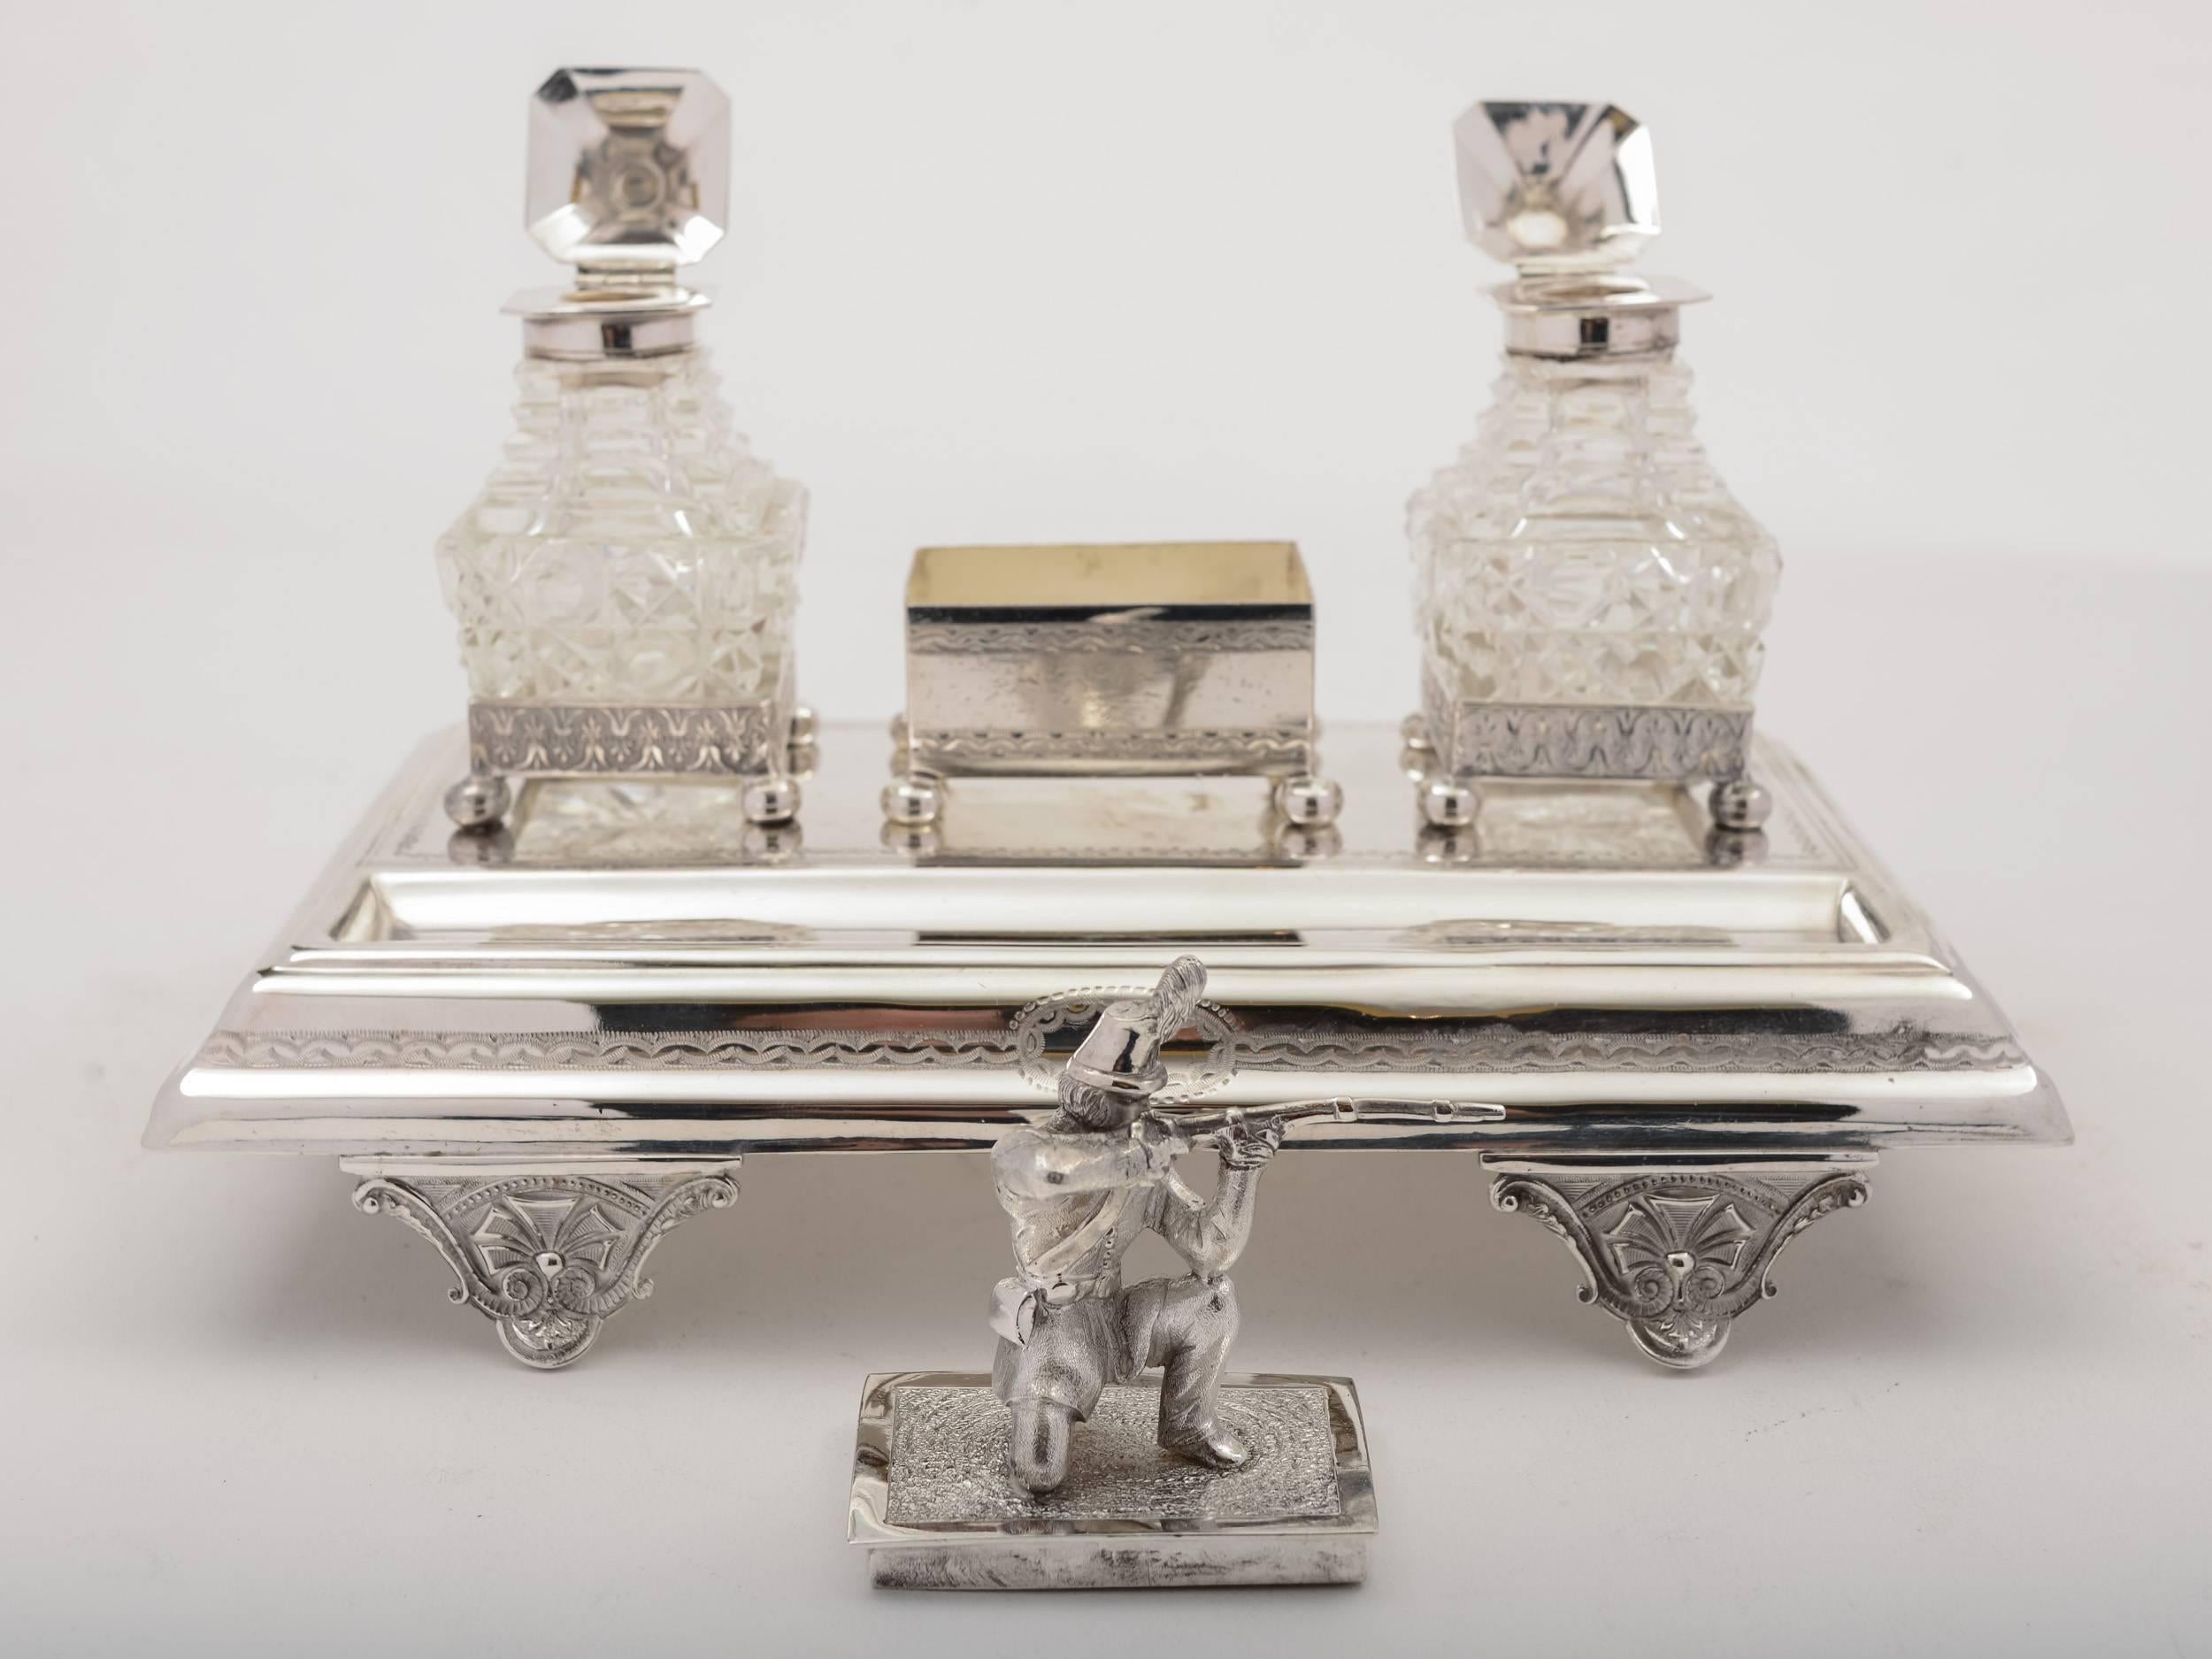 A stunning English Victorian silver plated ink stand with model of soldier in firing position crouched on stamp box in centre, flanked by X2 cut glass inkwells which have pagoda shaped tops. The stand sits on four embossed cast feet and there is